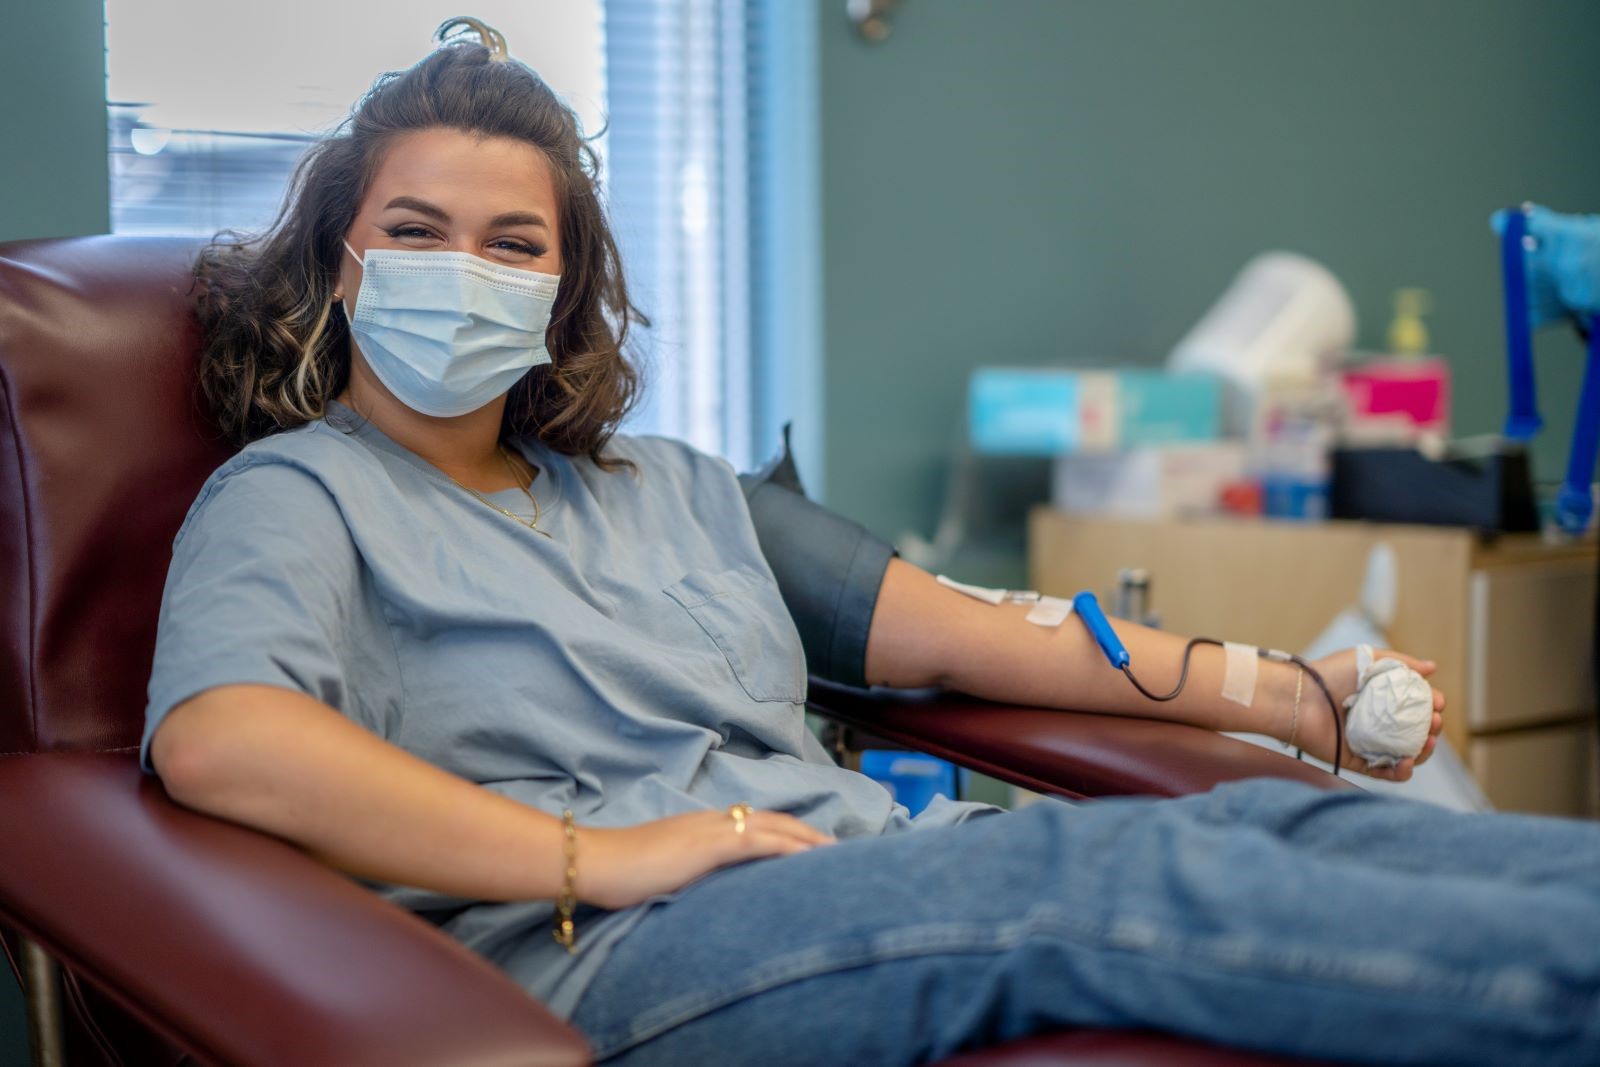 CHH Announces Blood Drives, Partnership with Connecticut Blood Center